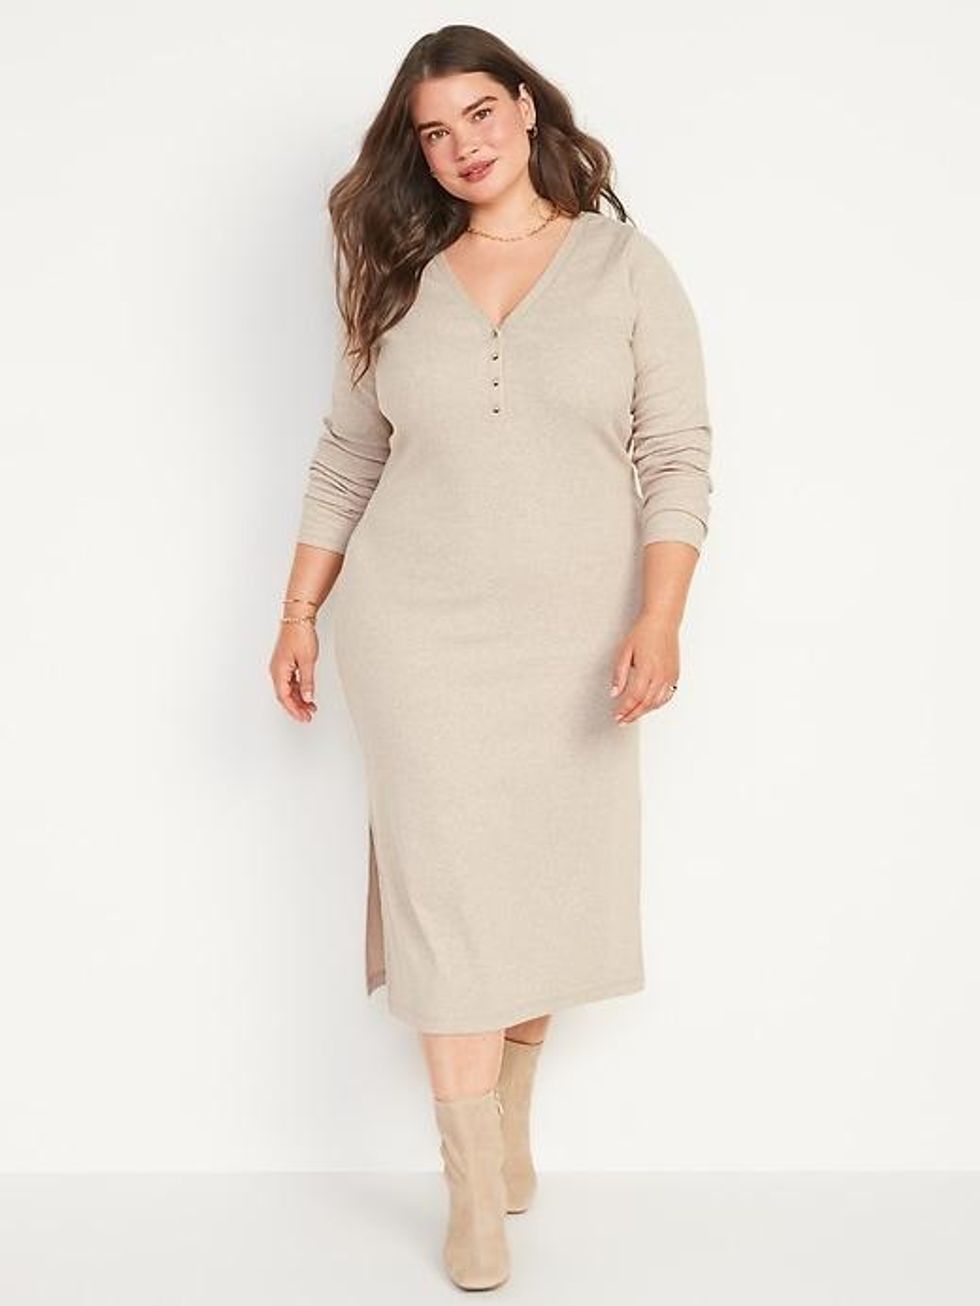 Cute Fall Dresses For Women, 2022 Dresses Trends - Brit + Co